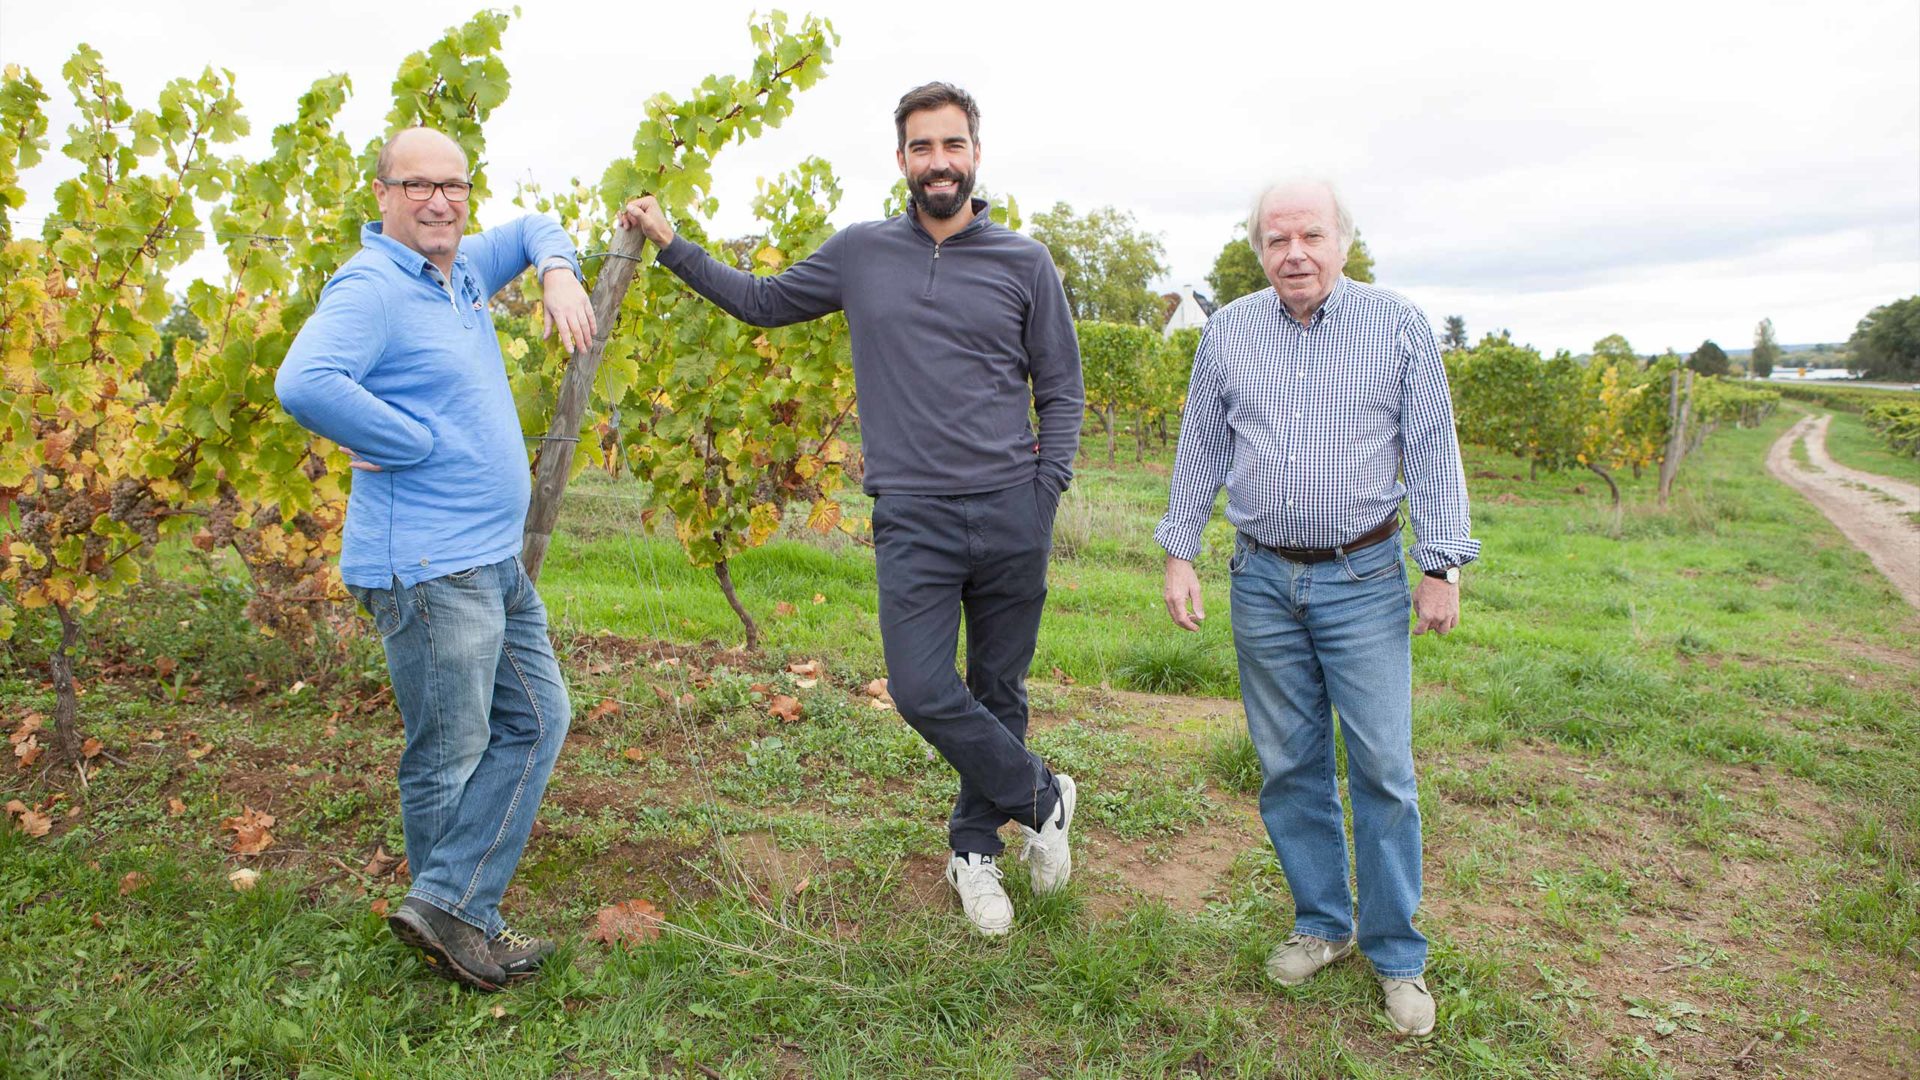 Ulrich Allendorf and his team grow Riesling in the Jesuitengarten for us